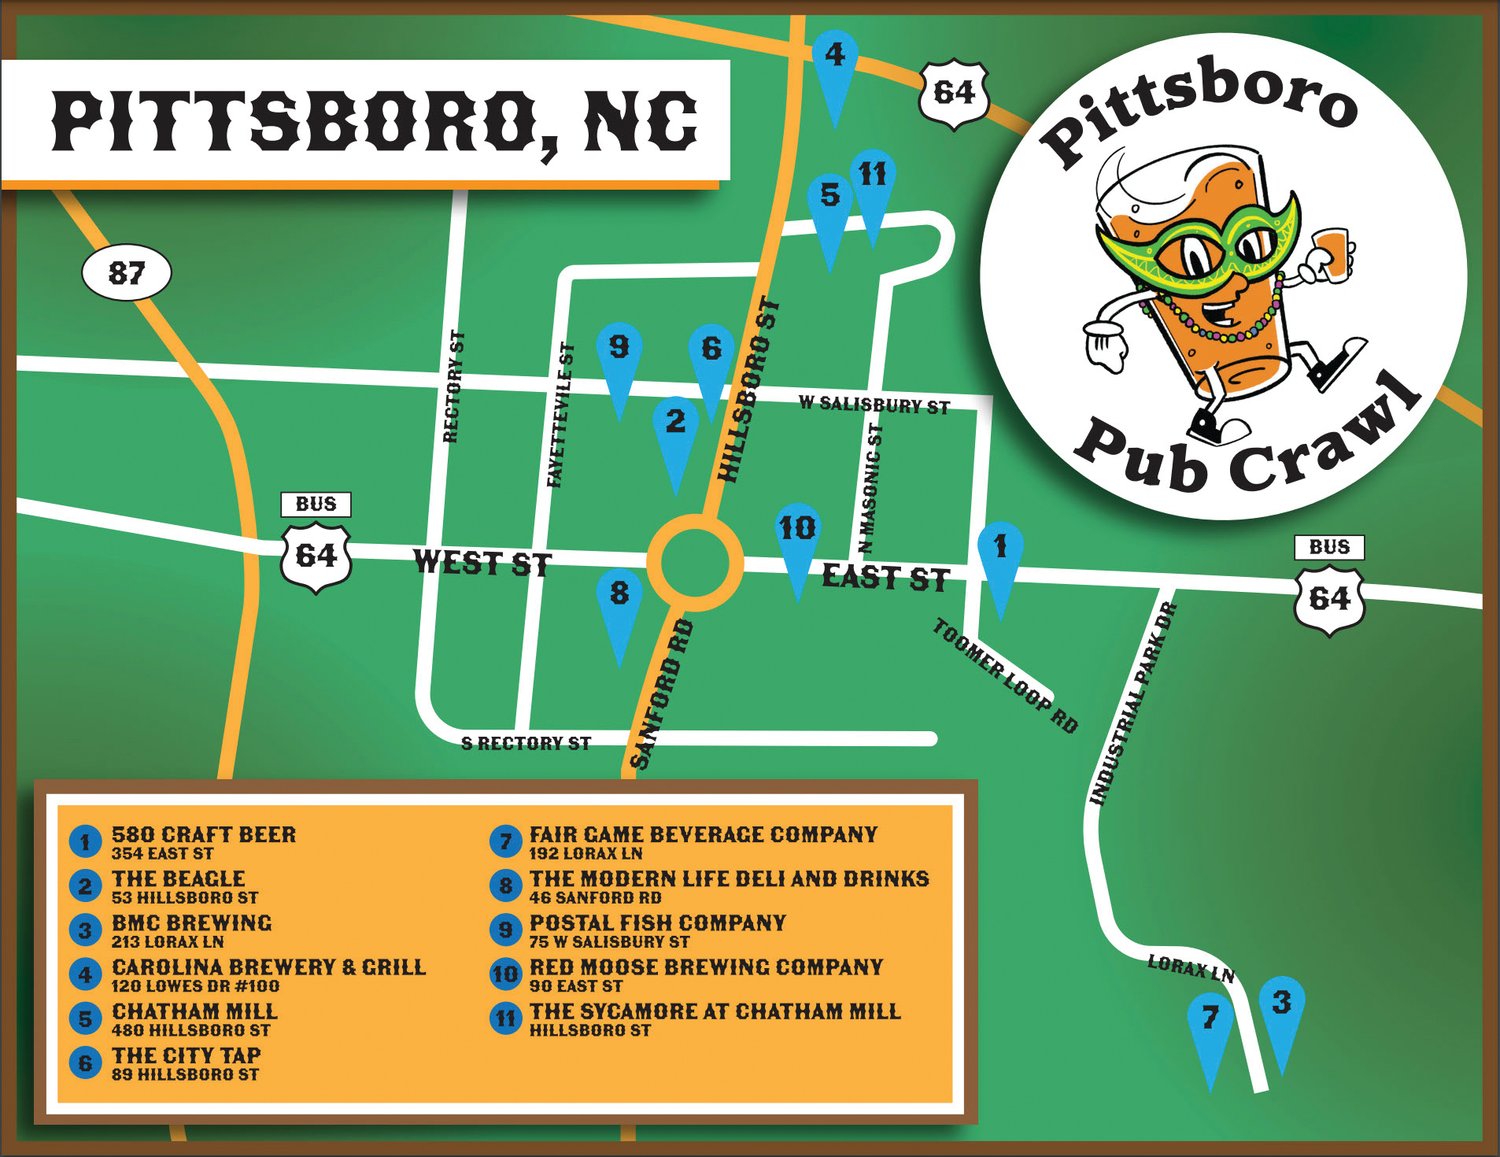 A map showing location of the Pittsboro Pub Crawl spots for the upcoming 'Mardi Gras' event. .